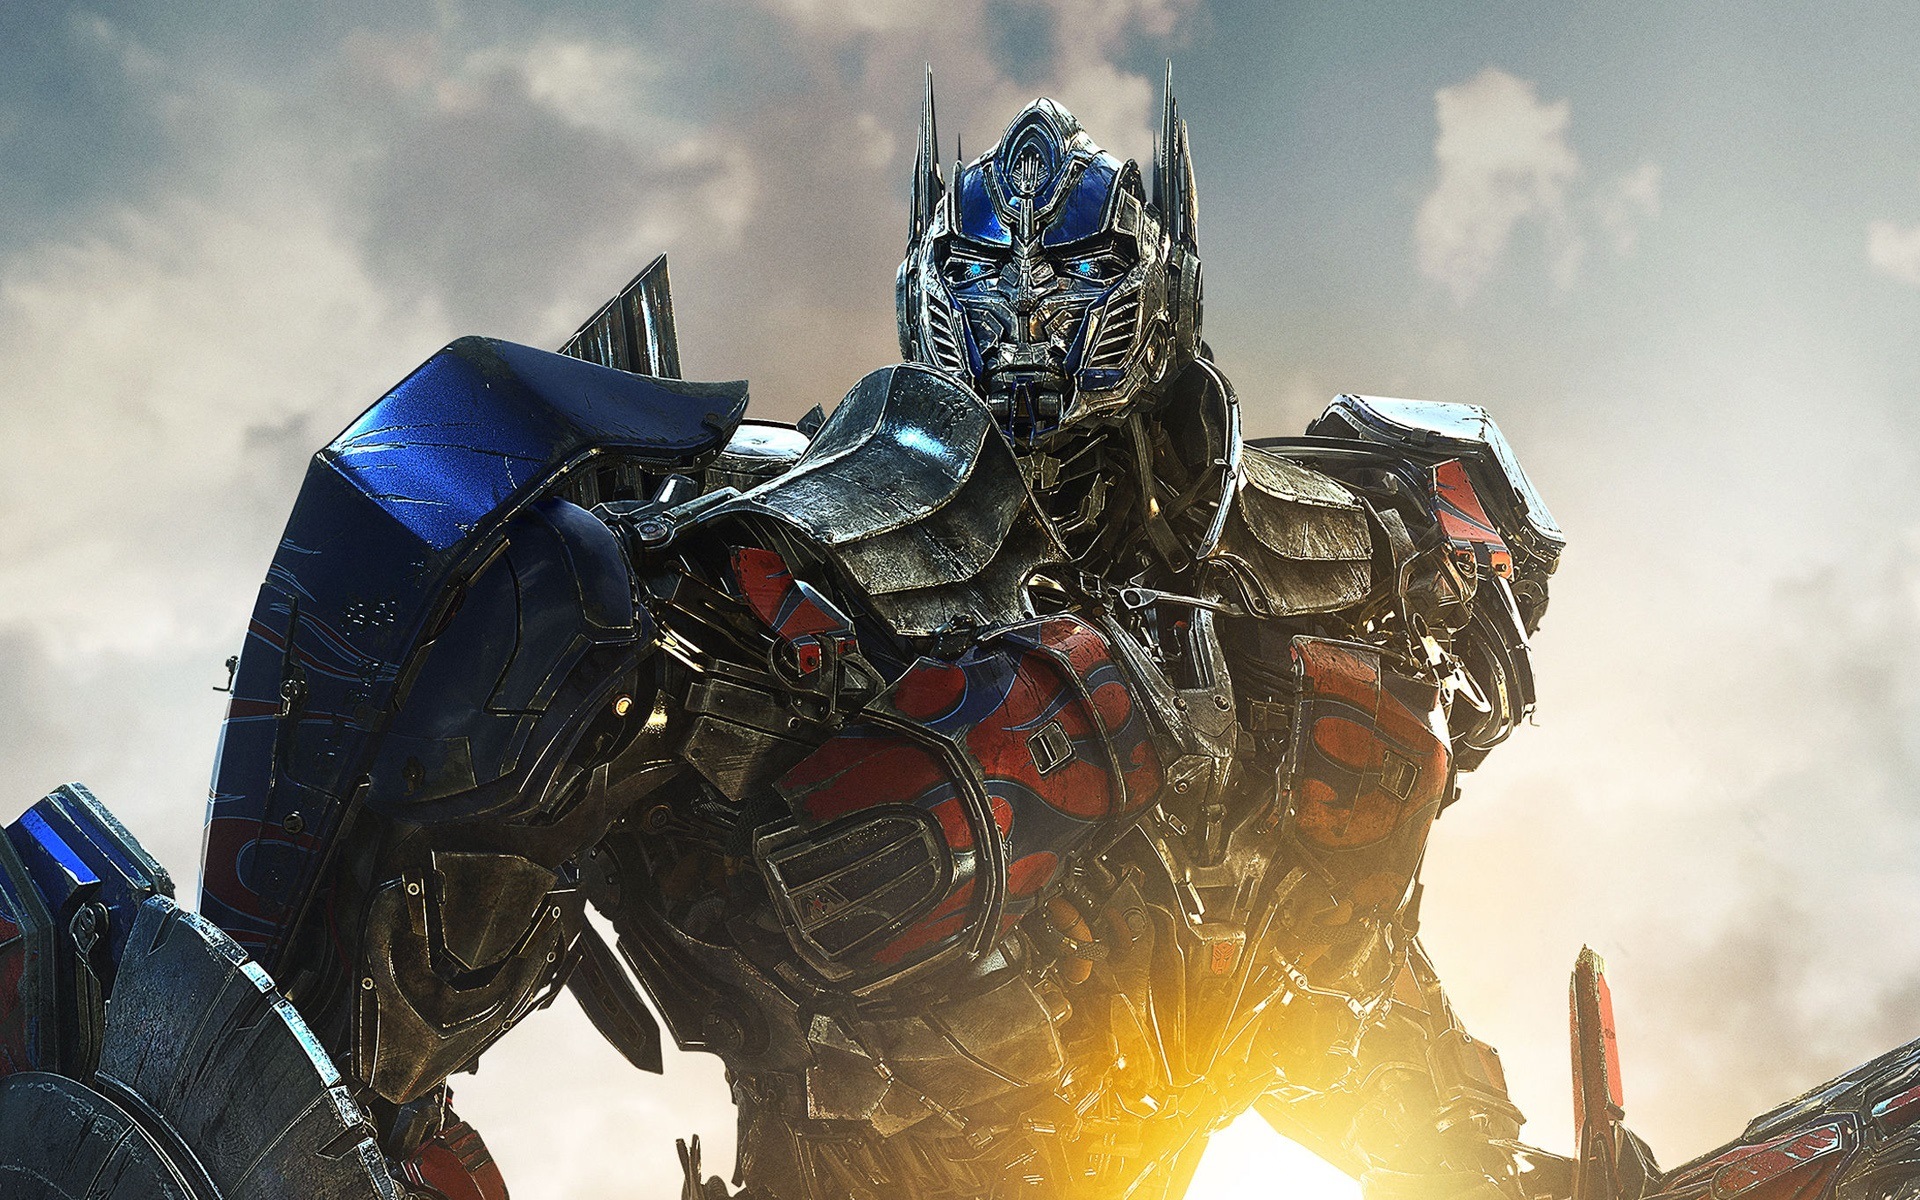 2014 Transformers: Age of Extinction HD tapety #2 - 1920x1200